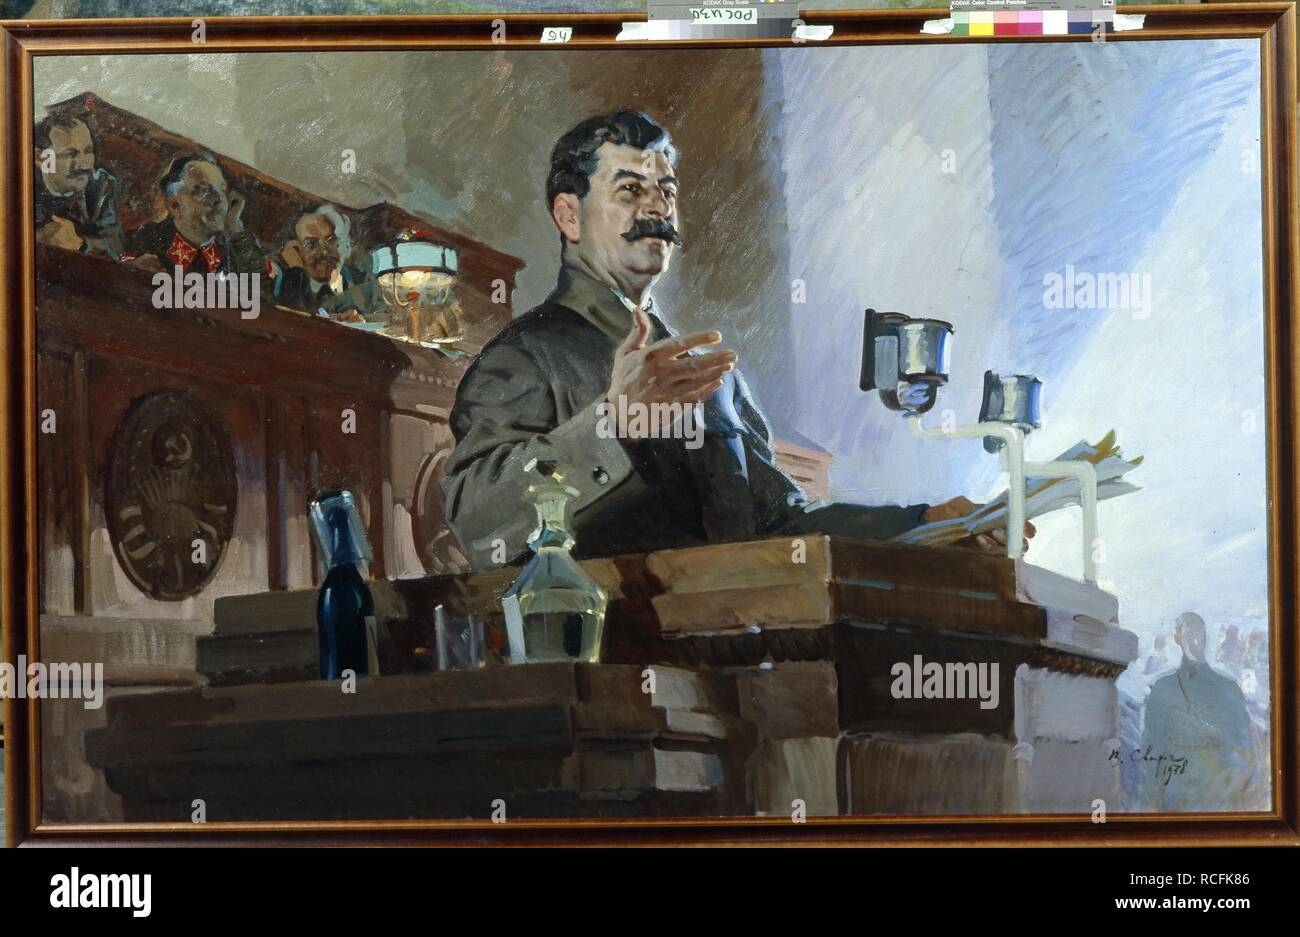 Stalin declared the Soviet constitution on the 8th Extraordinary Congress of Soviets on December 5, 1936. Museum: State Museum-and exhibition Centre ROSIZO, Moscow. Author: Svarog, Vasili Semyonovich. Stock Photo